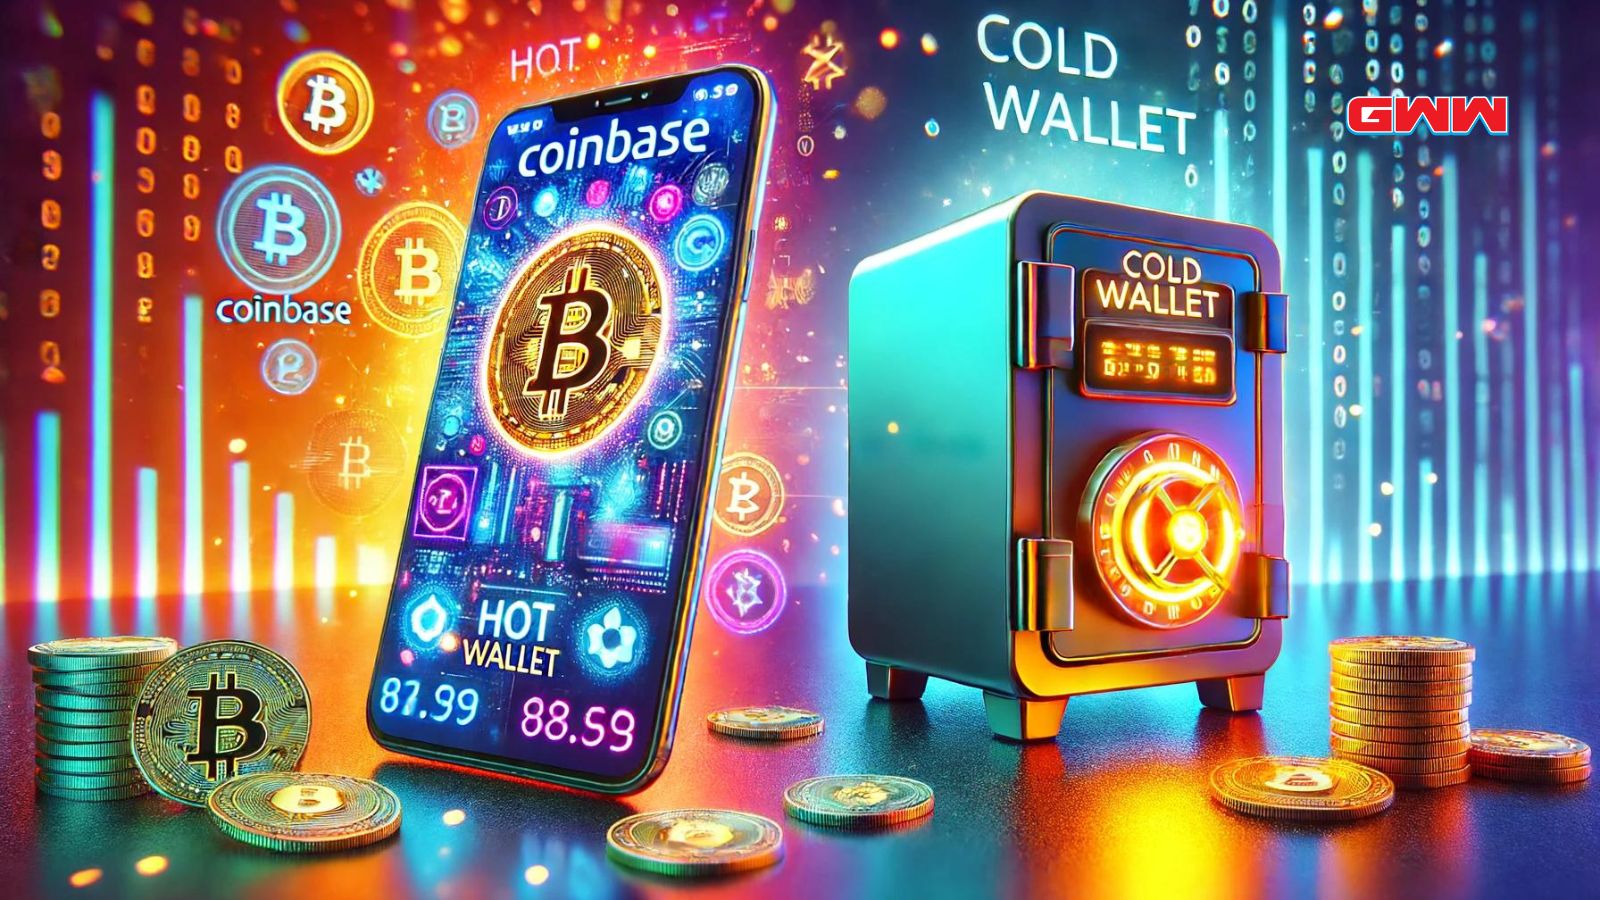 A scene focusing on Coinbase with a digital, vibrant theme indicating it's a hot wallet.